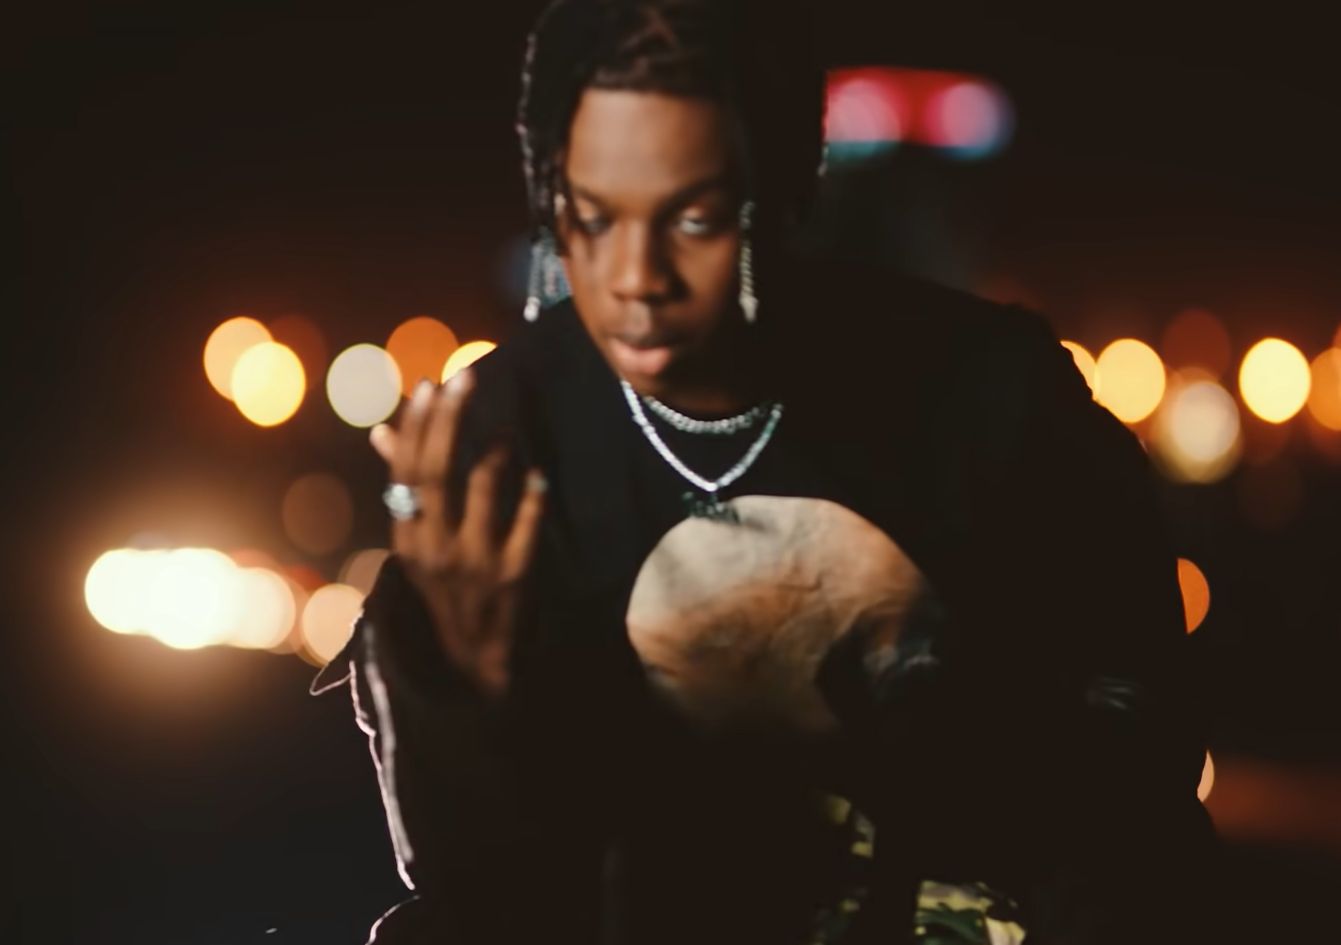 Rema in the official video of Iron Man